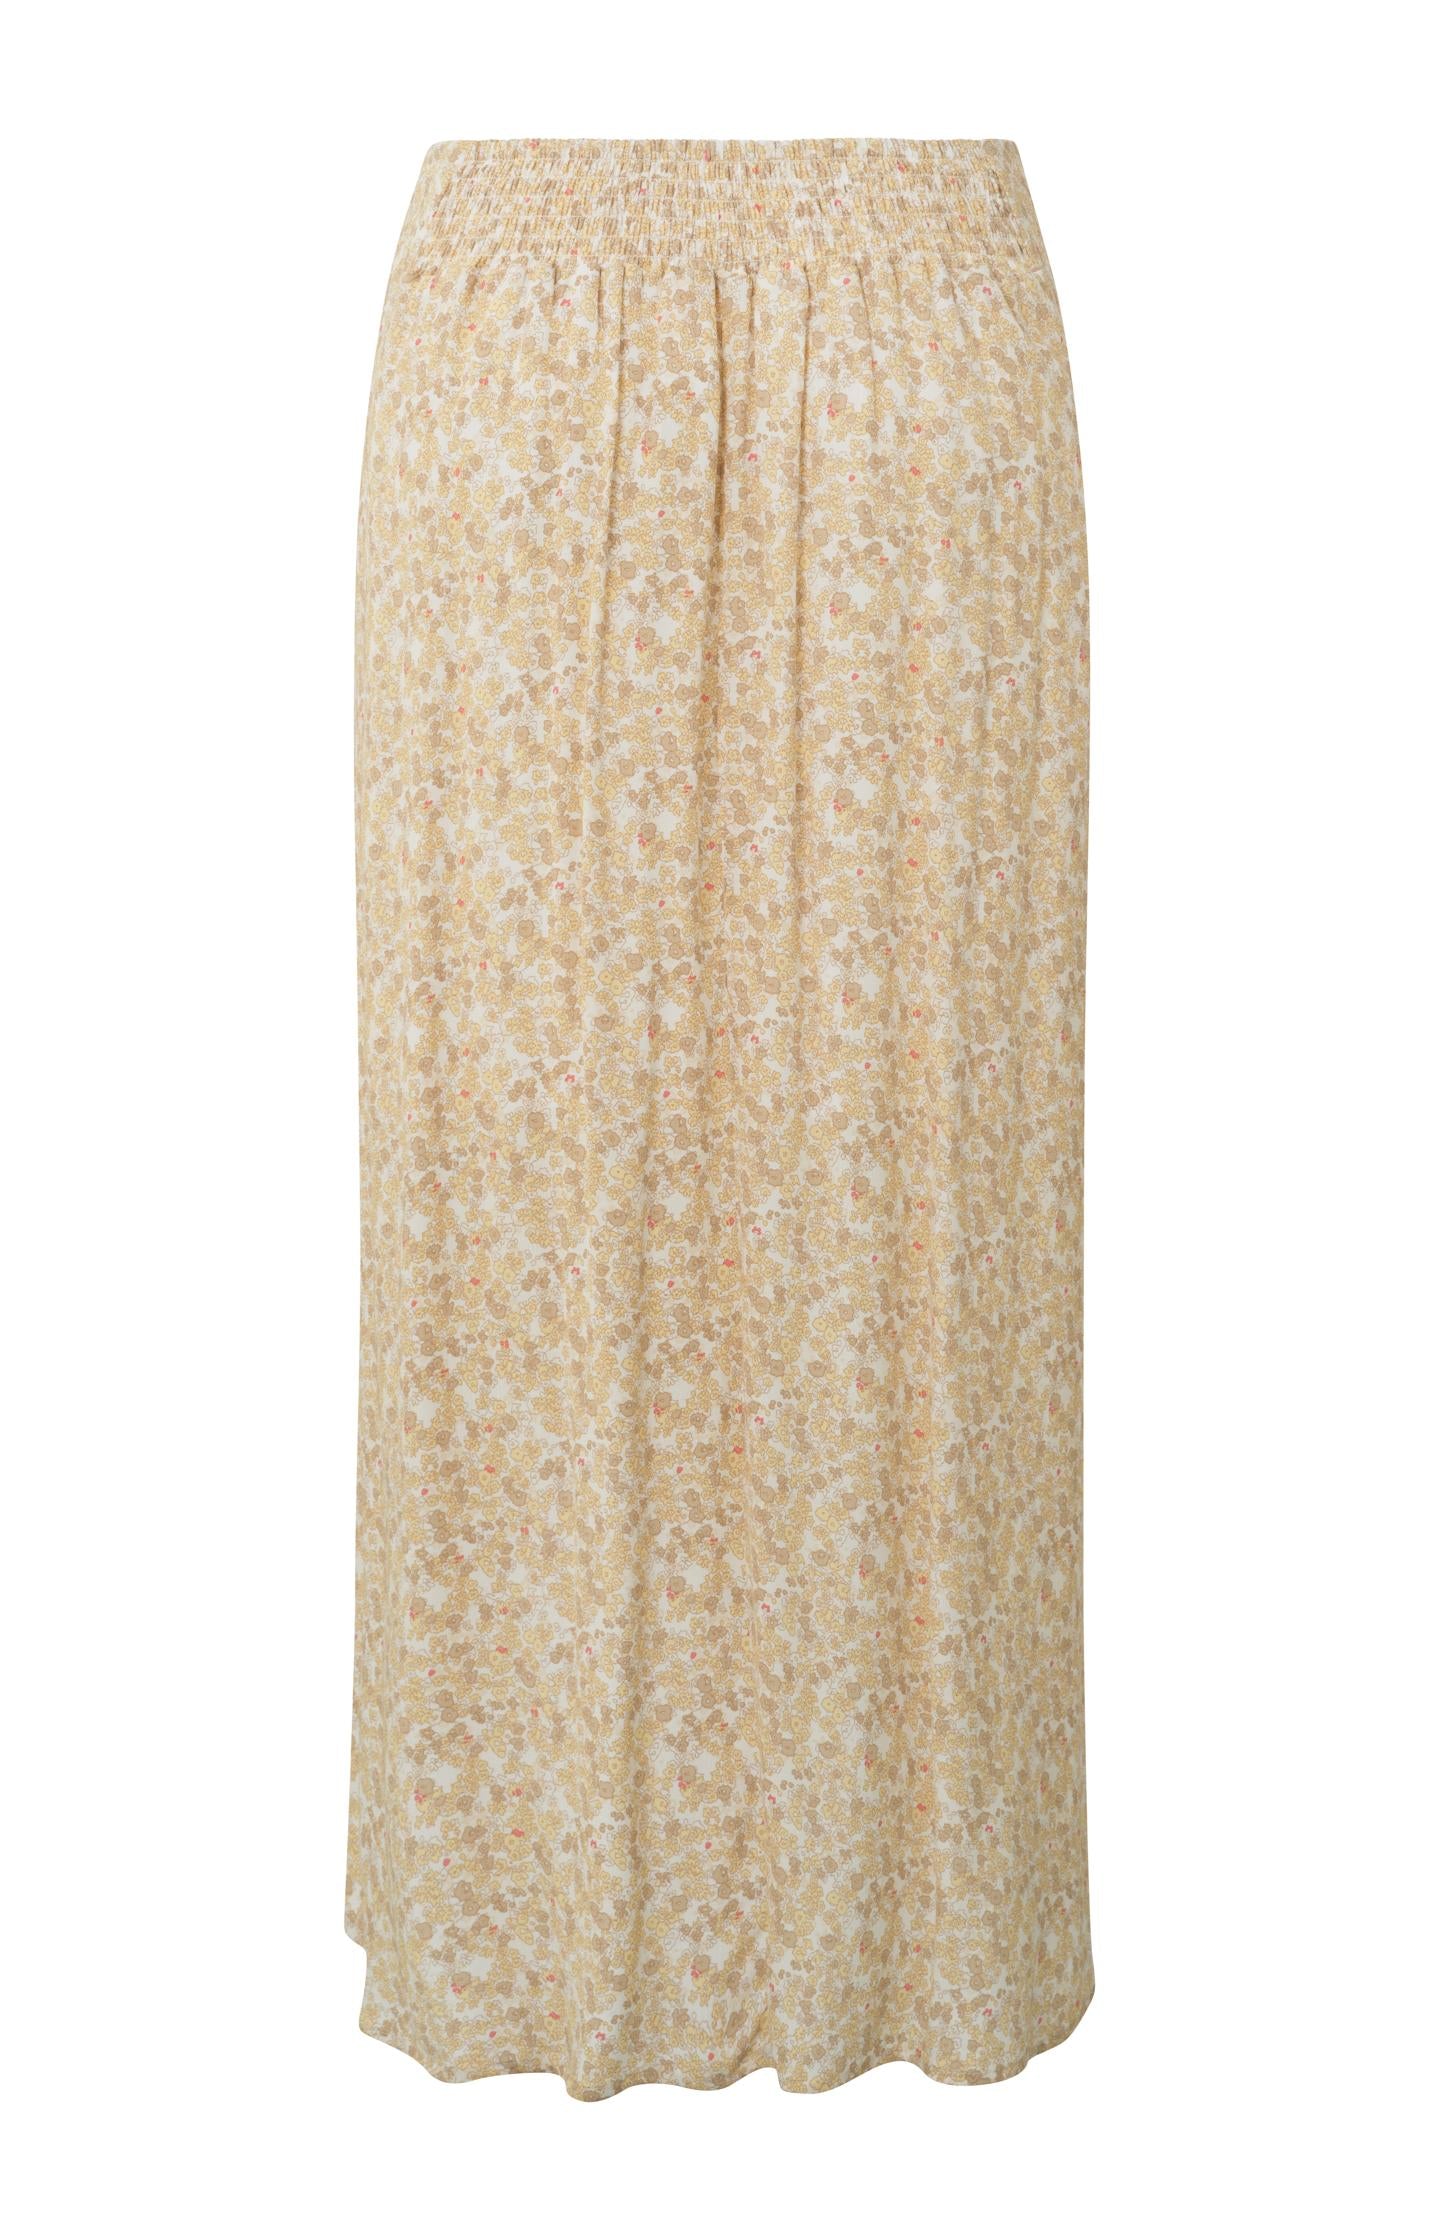 Midi skirt with elastic waist, wrap effect and floral print